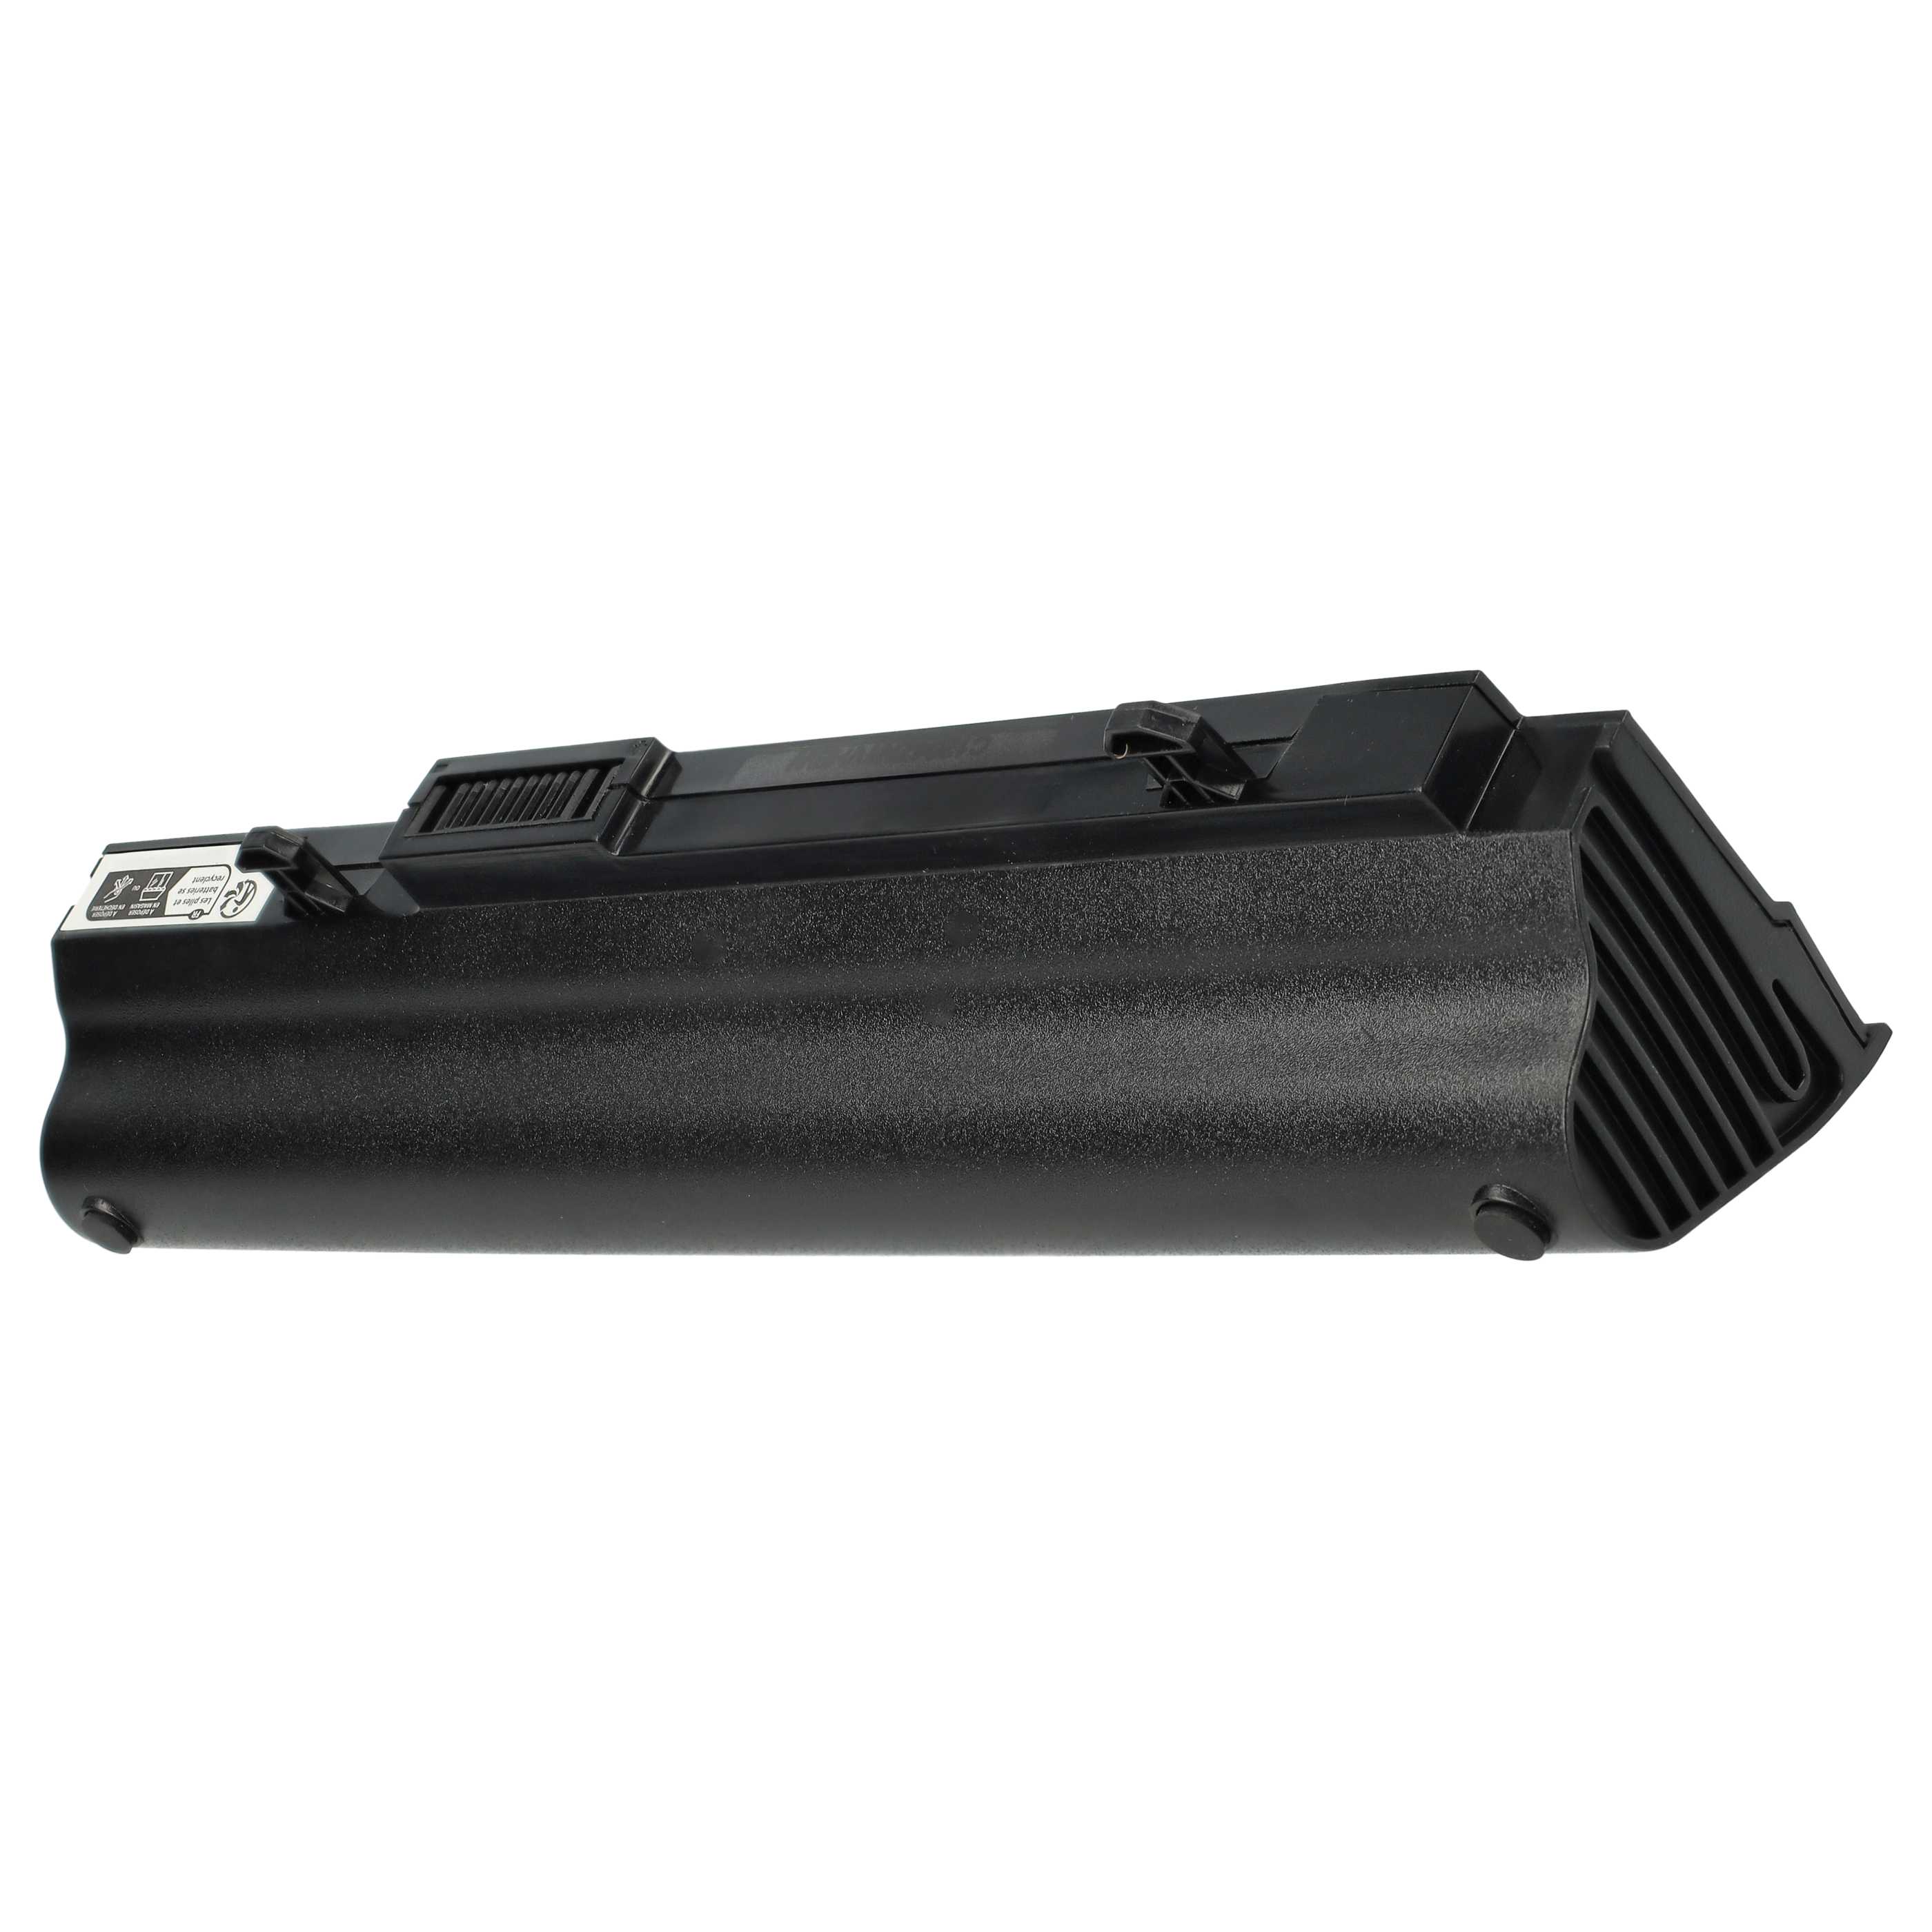 Notebook Battery Replacement for Asus A31-1015, A32-1015, AL31-1015, PL32-1015 - 2200mAh 10.8V Li-Ion, black